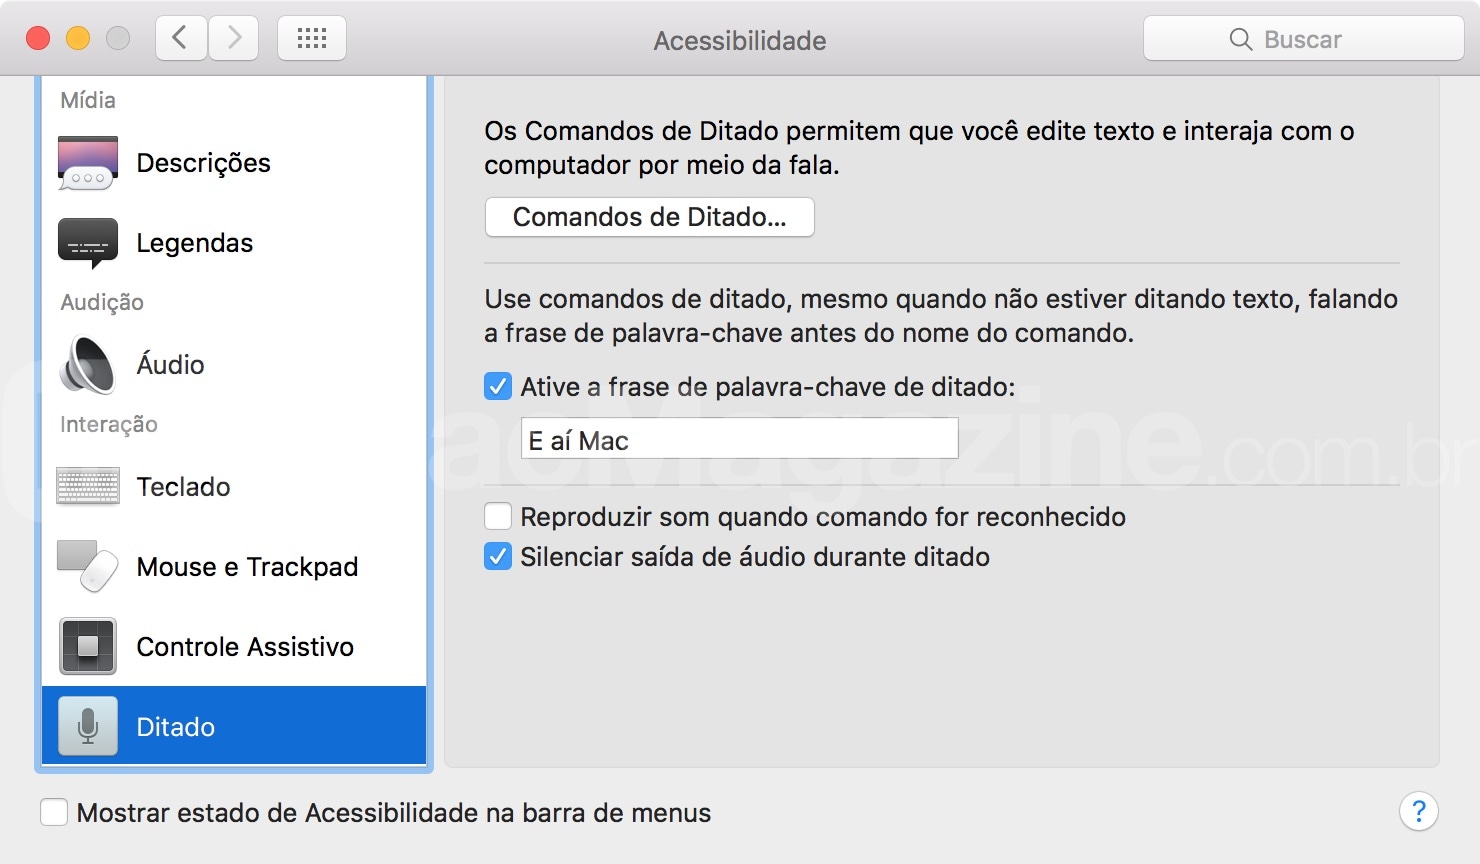 How about having a kind of Siri on the Mac today? See how this is possible!